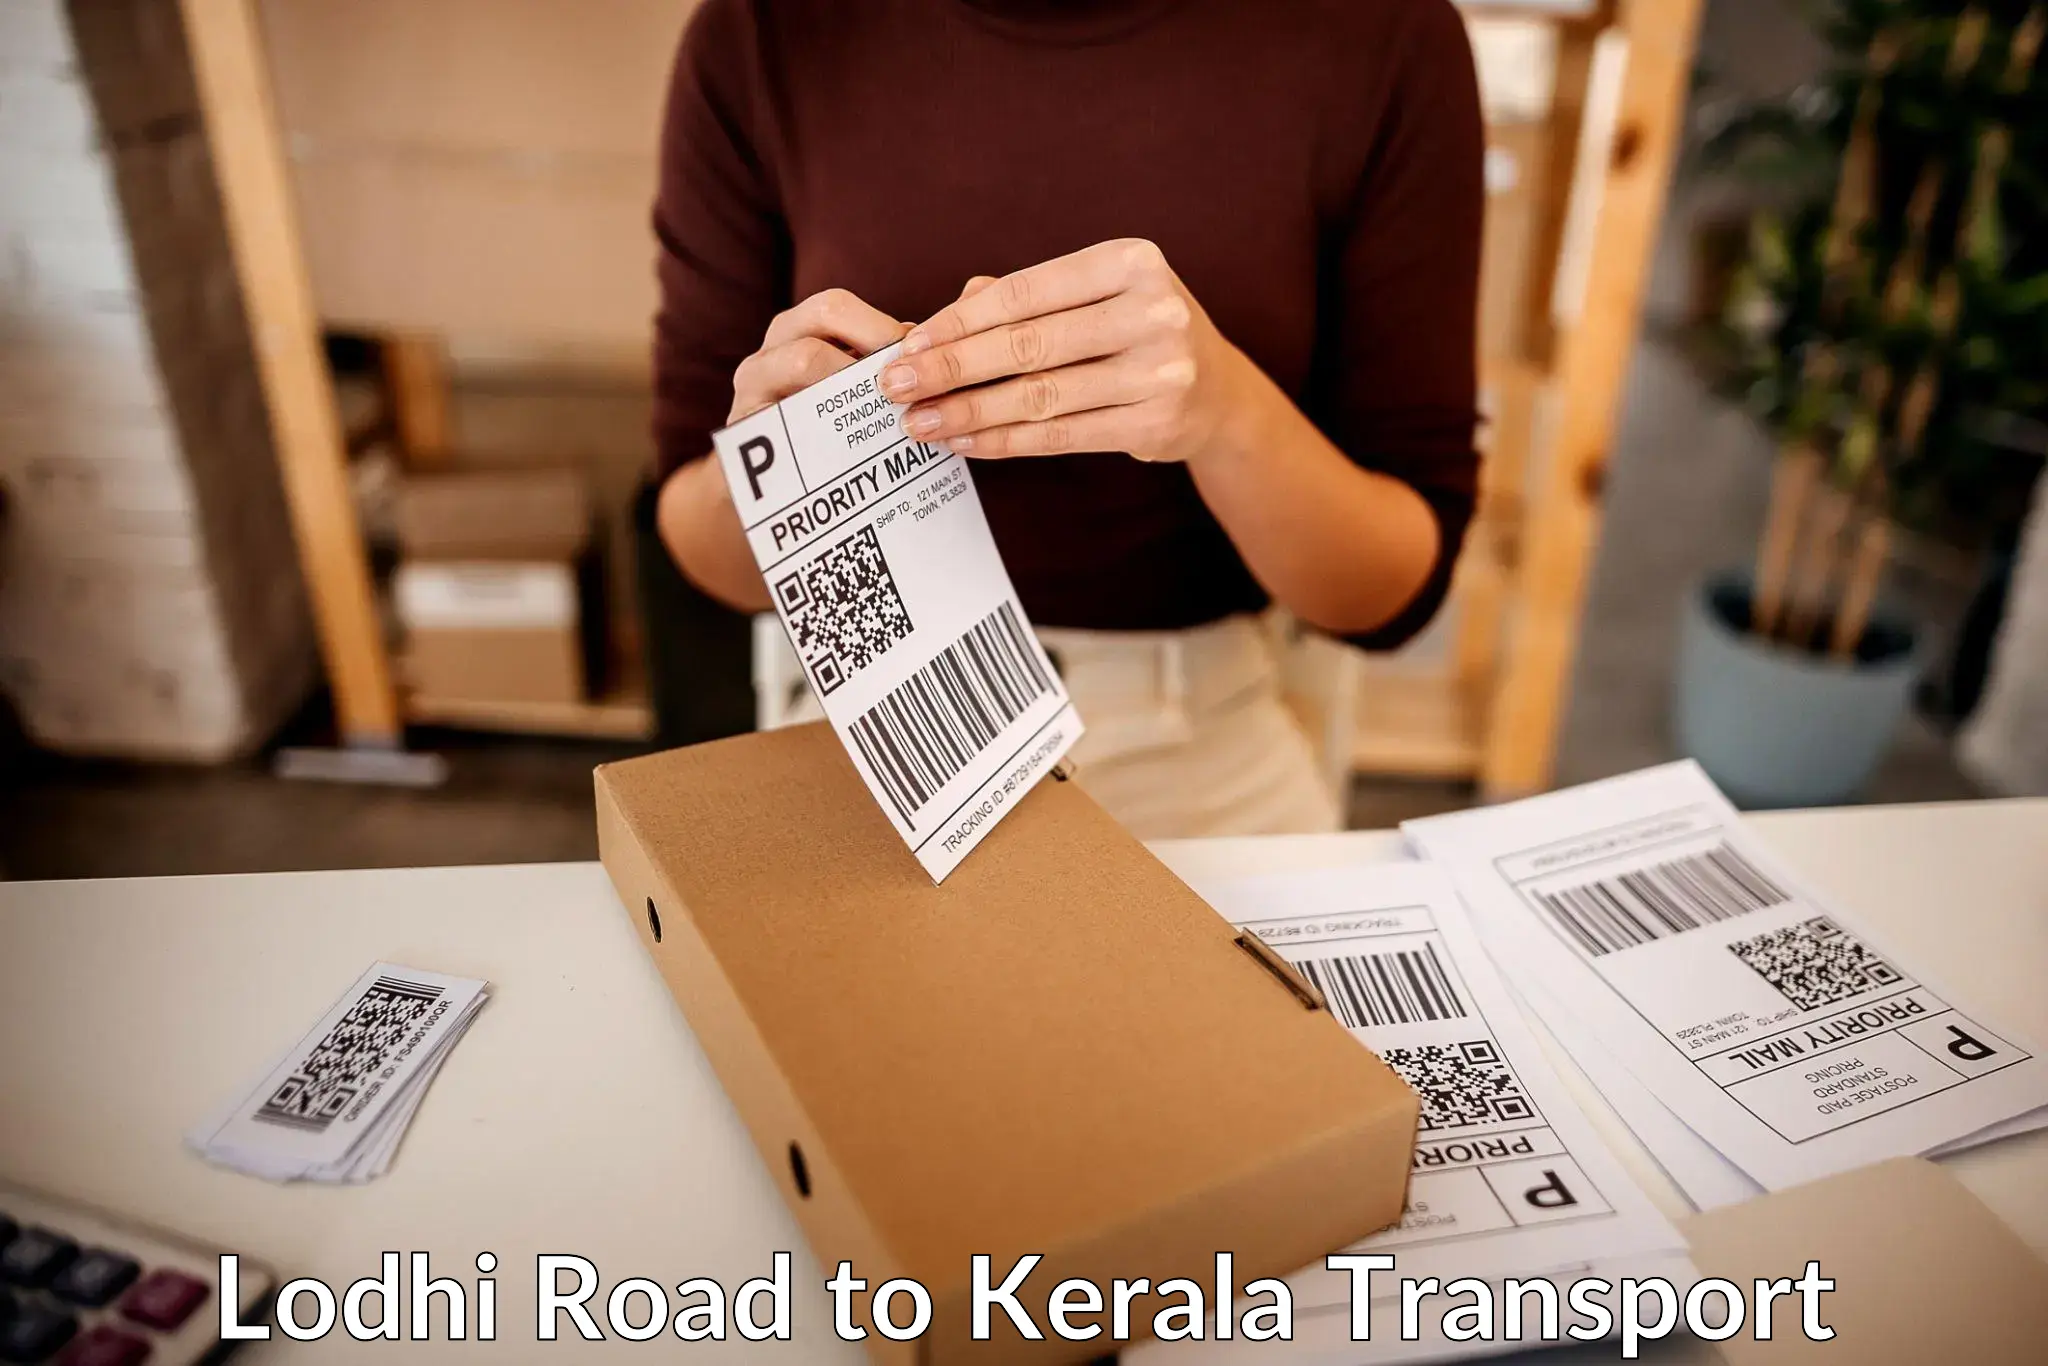 Online transport booking Lodhi Road to Parippally